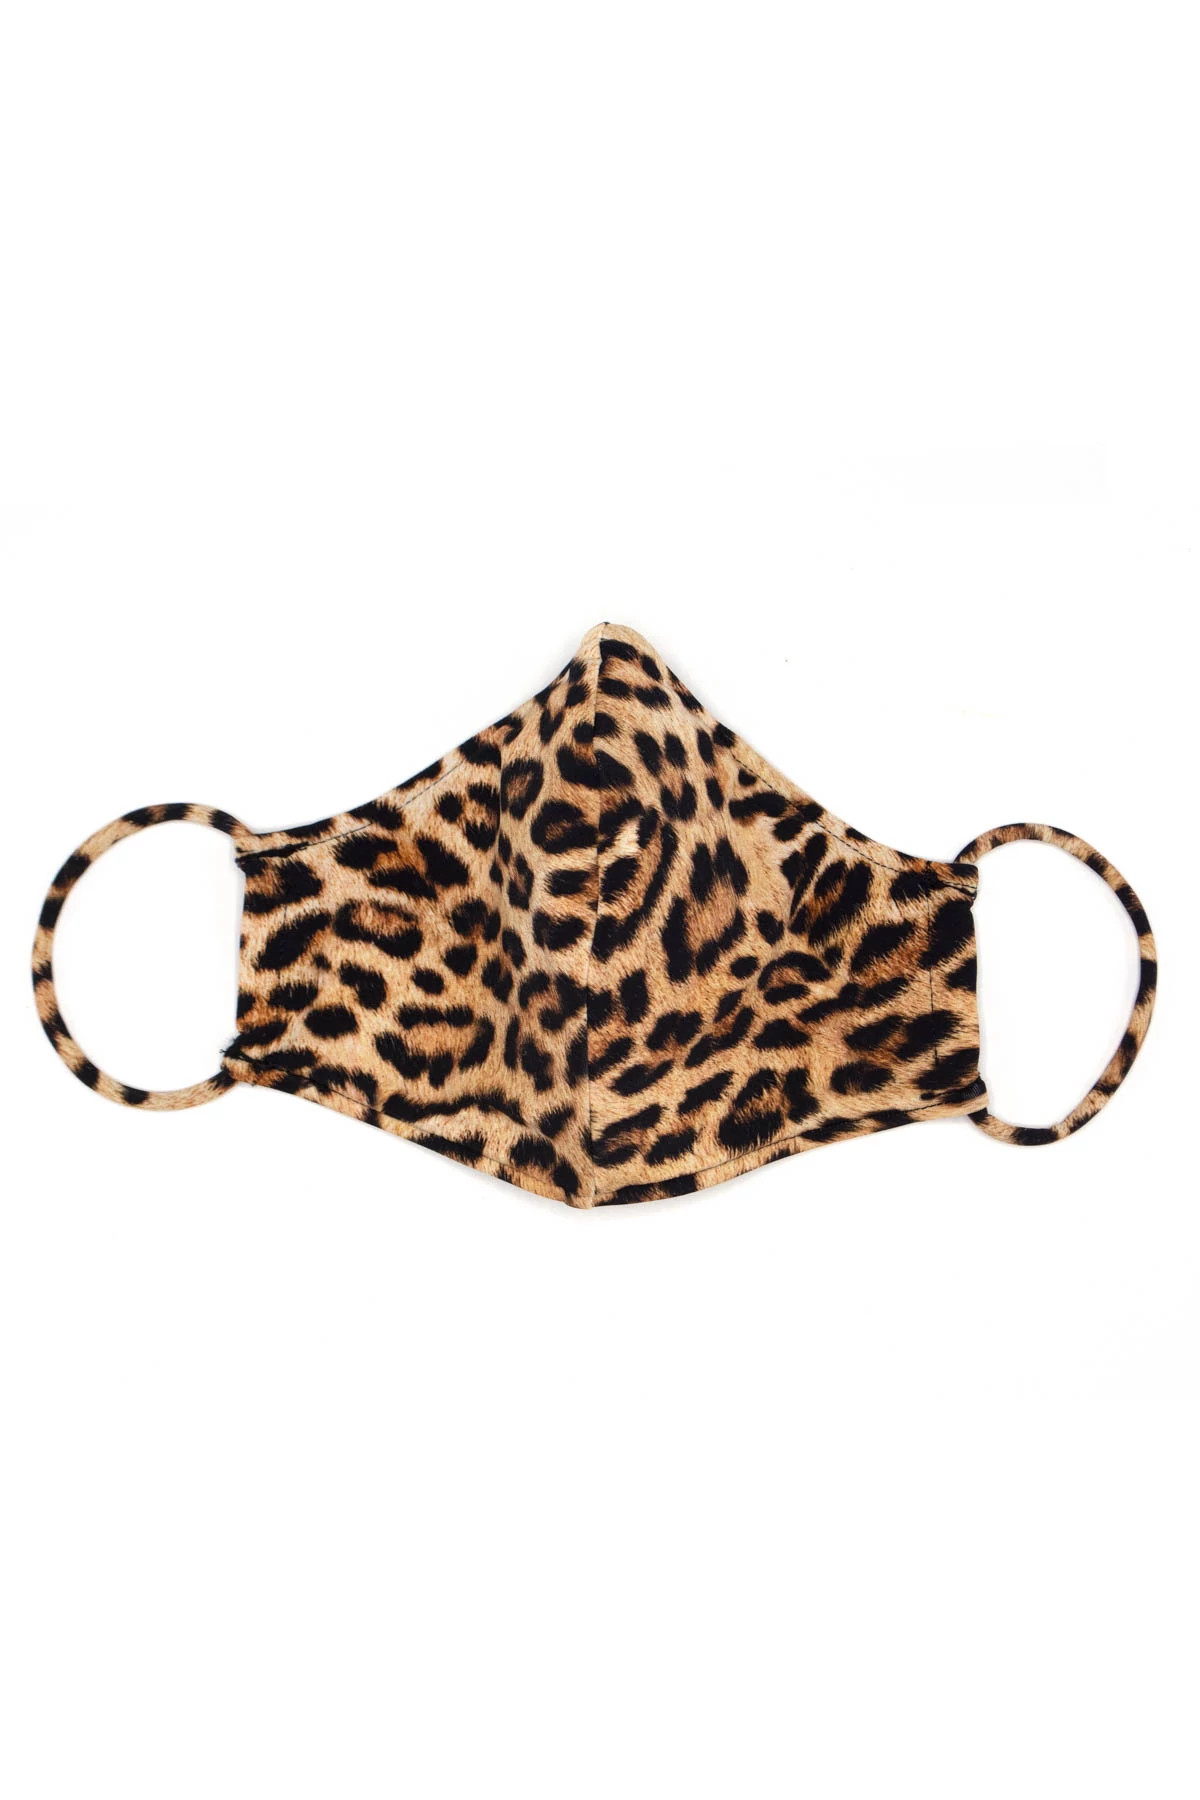 MULTI Wild One Leopard Adult Face Mask image number 1